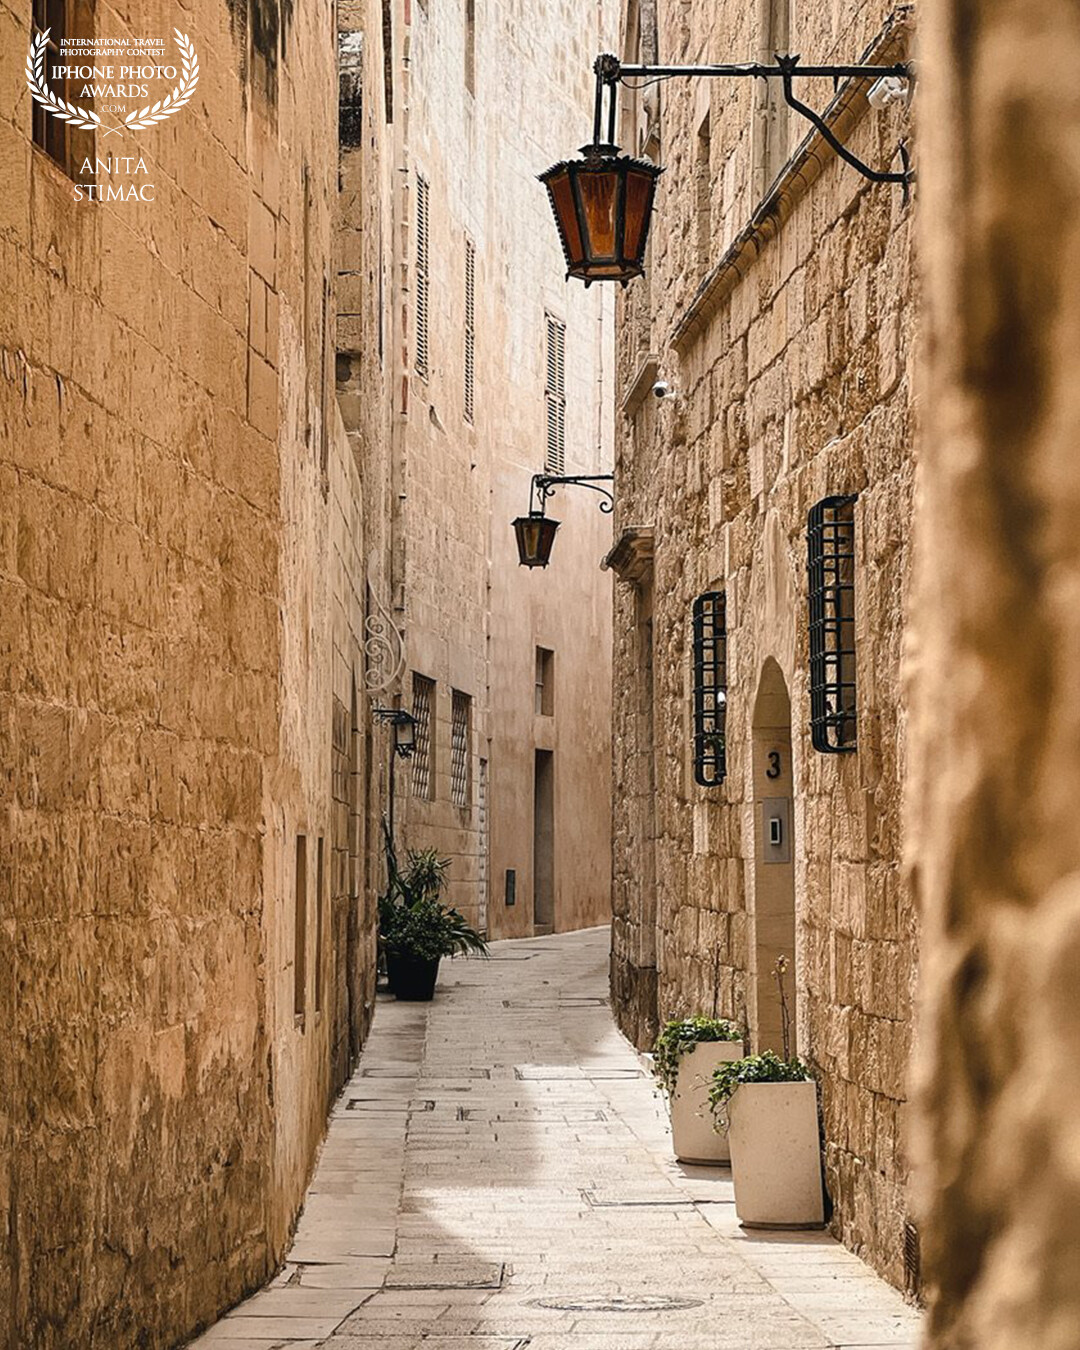 A quiet, narrow street in the historic town of Mdina, Malta. The rough, stone pavement and empty alleyway evoke a sense of solitude and history. Above, a lone lantern hangs silently, a reminder of the street's past.